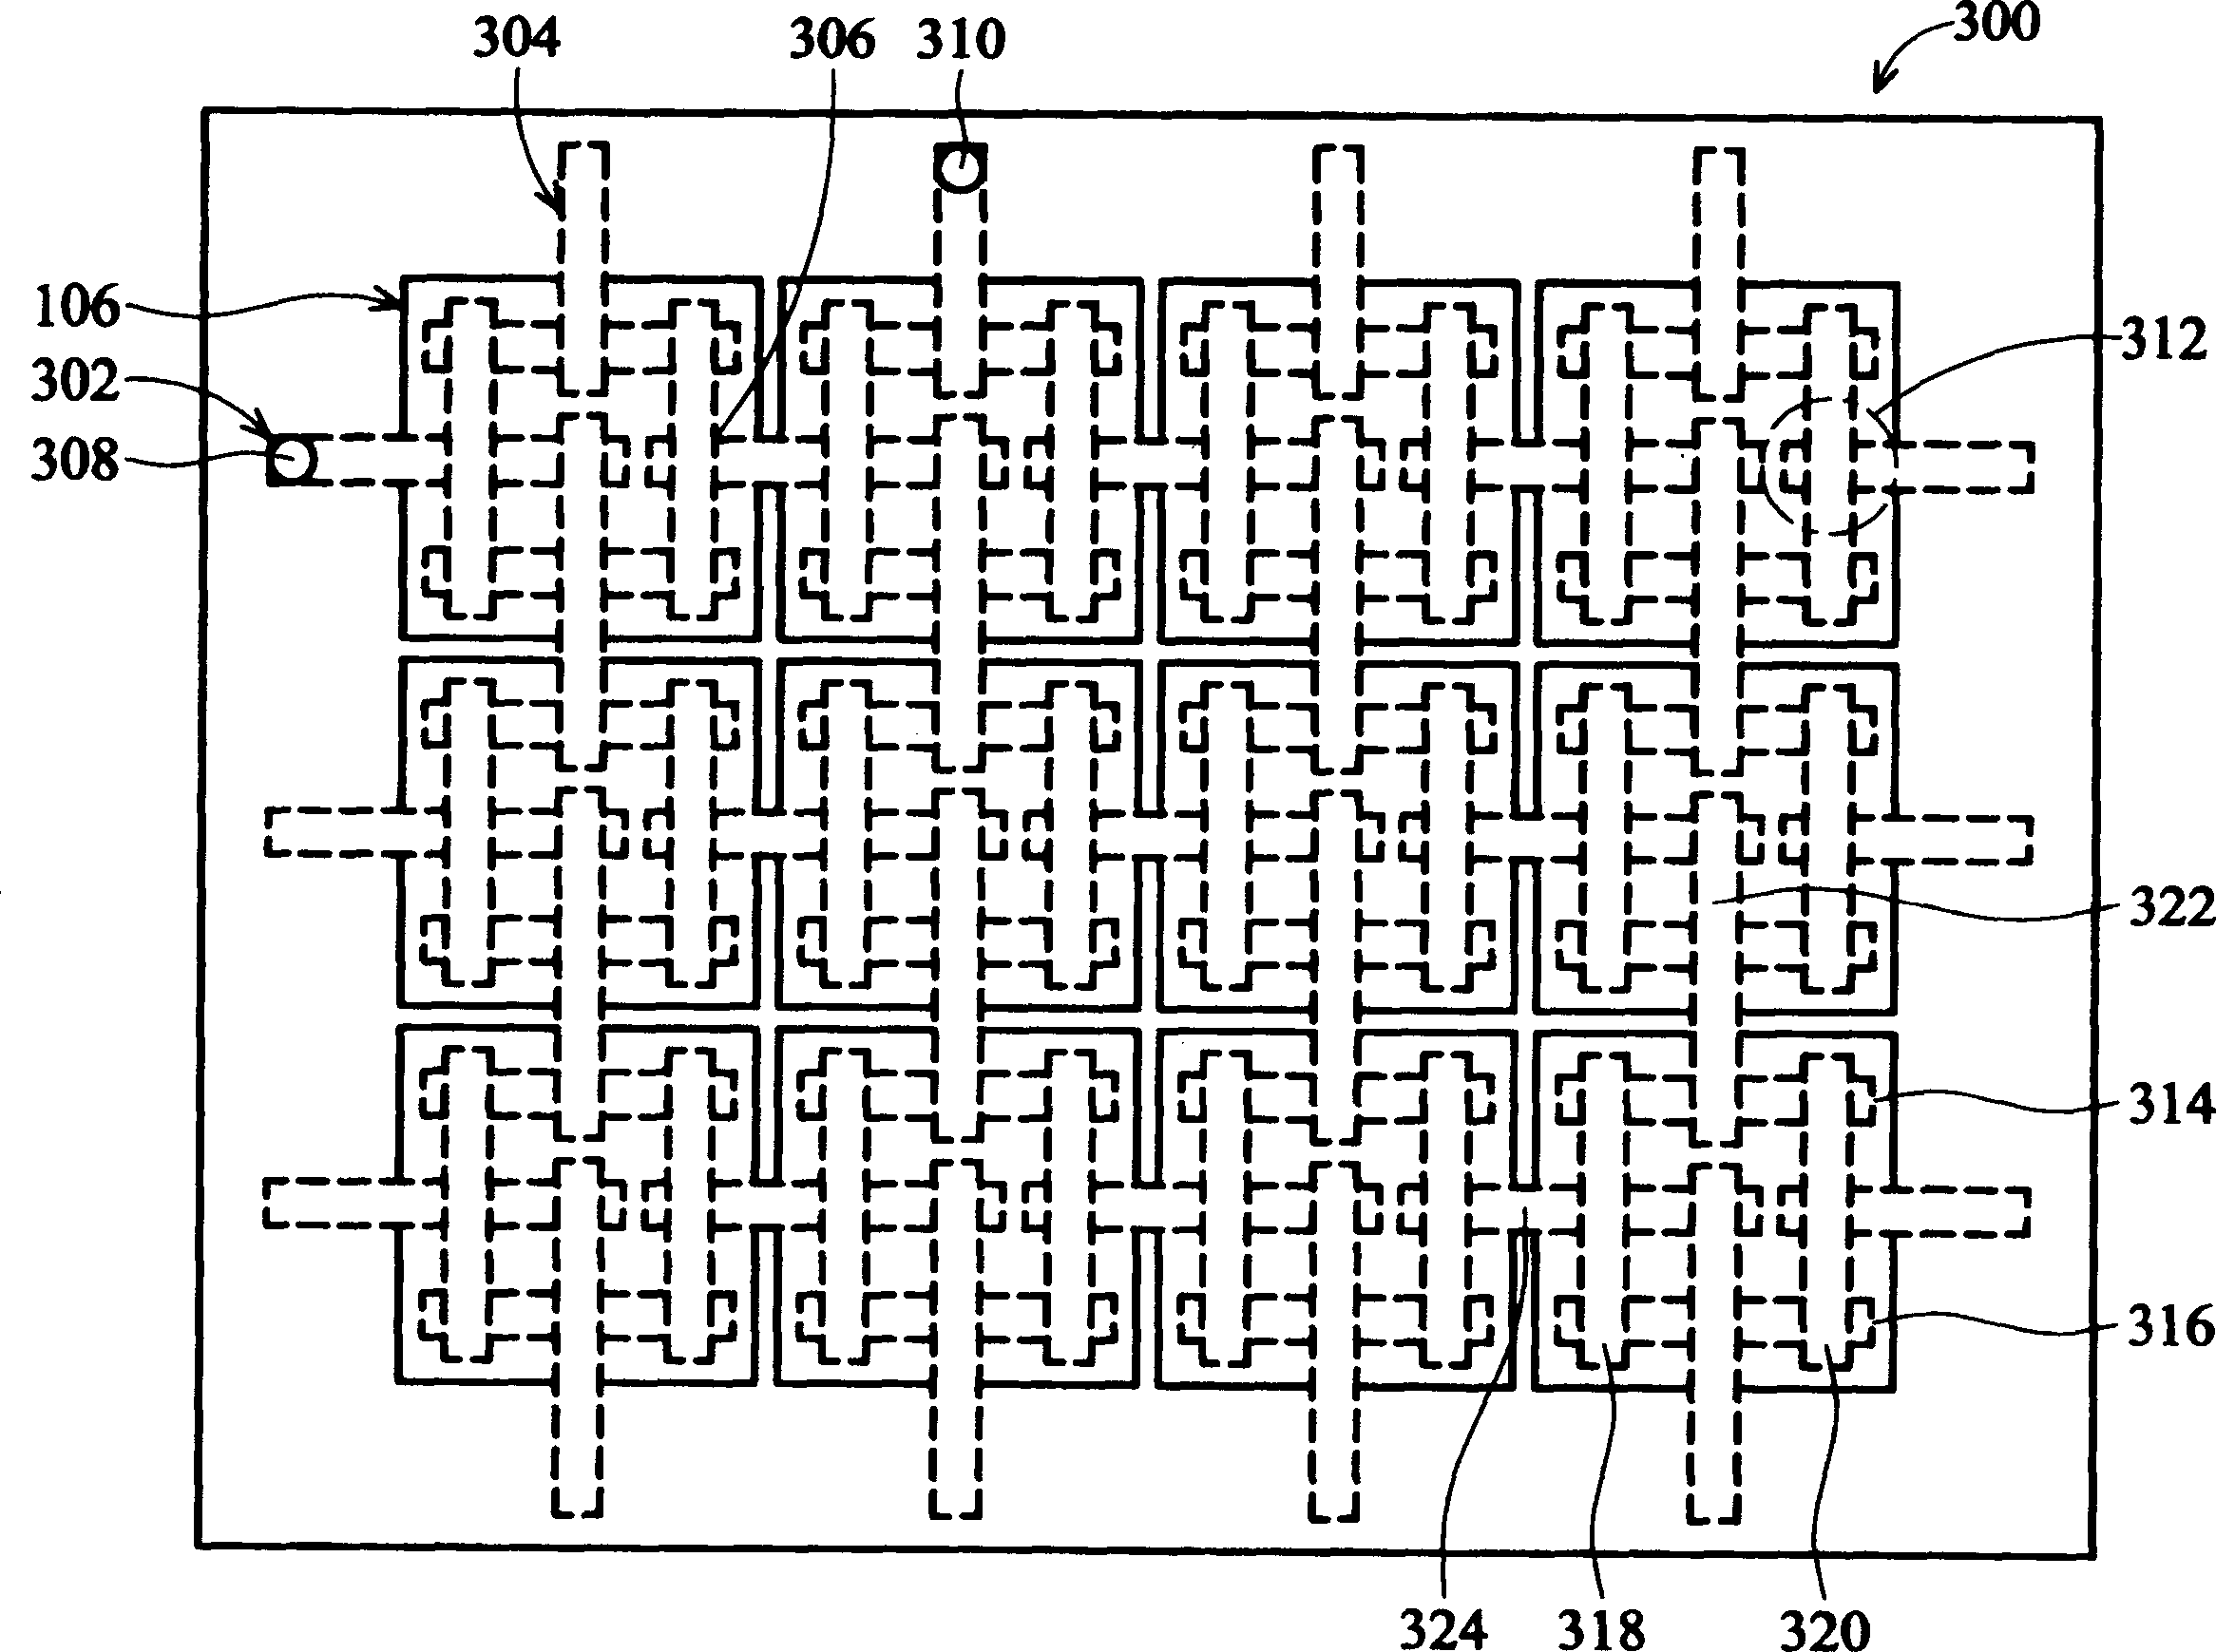 Integrated circuit design for routing an electrical connection